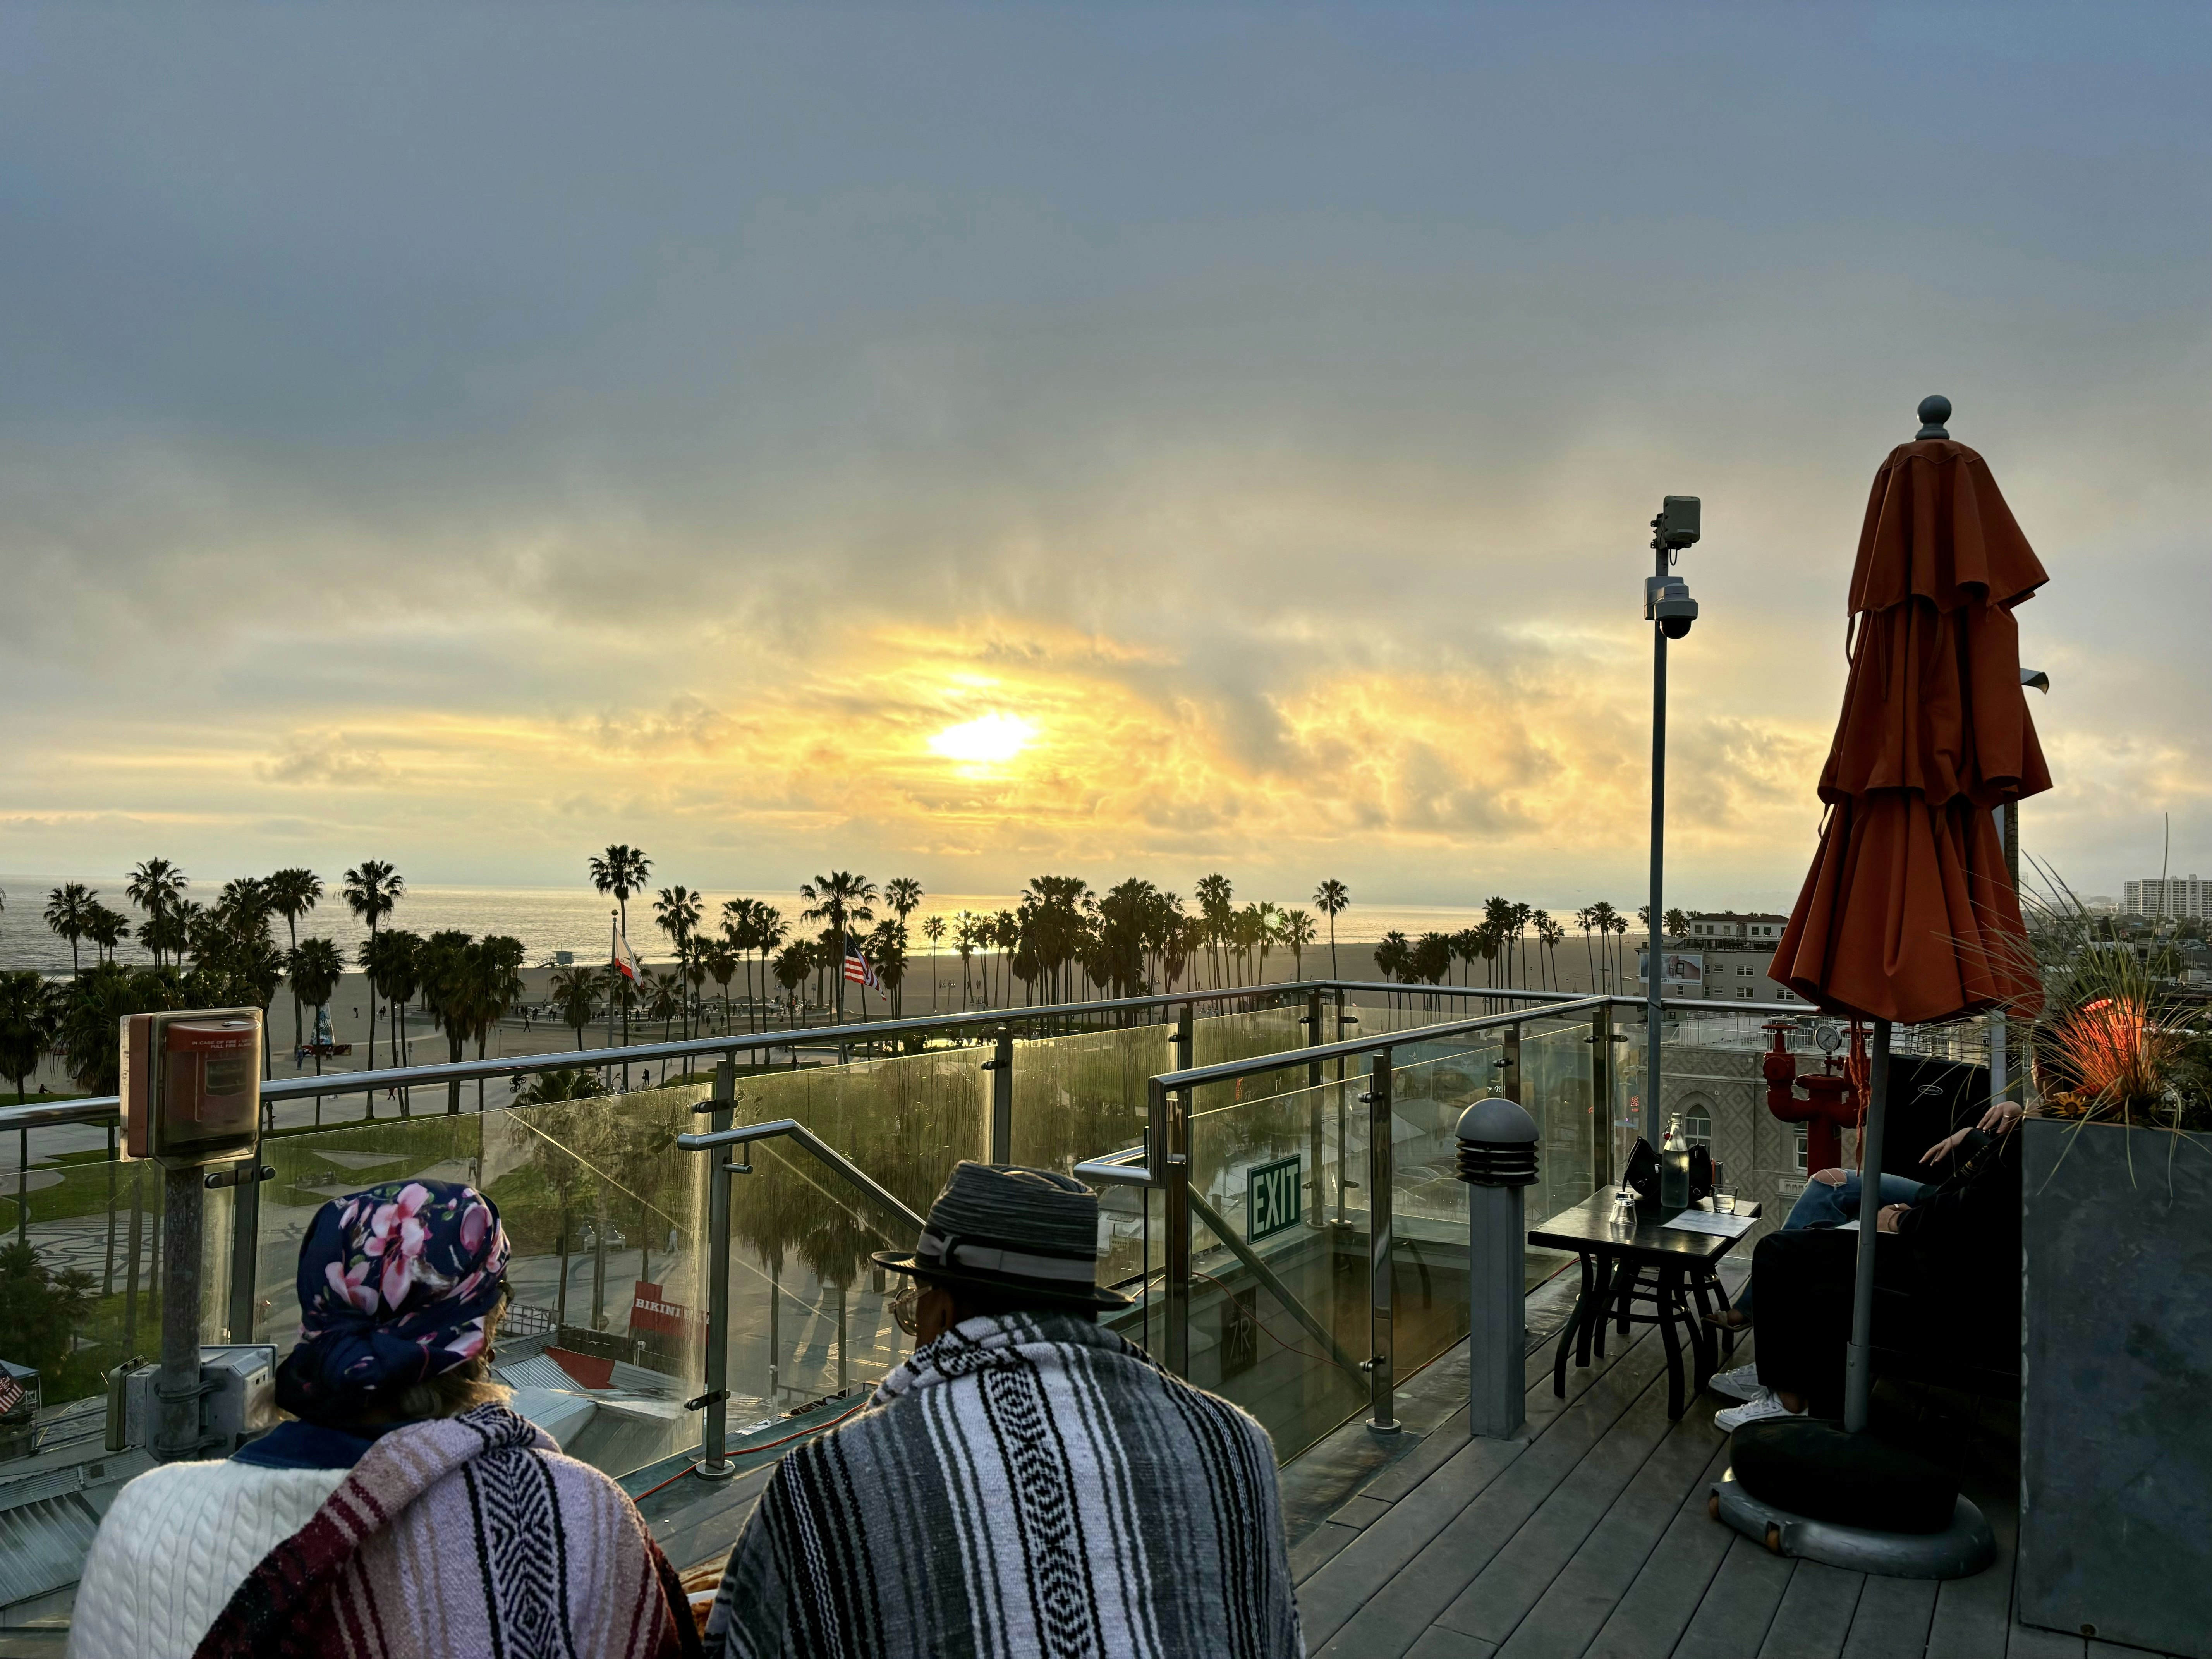 A view of the sunset from the rooftop of the Hotel Erwin, Venice Beach, LA 